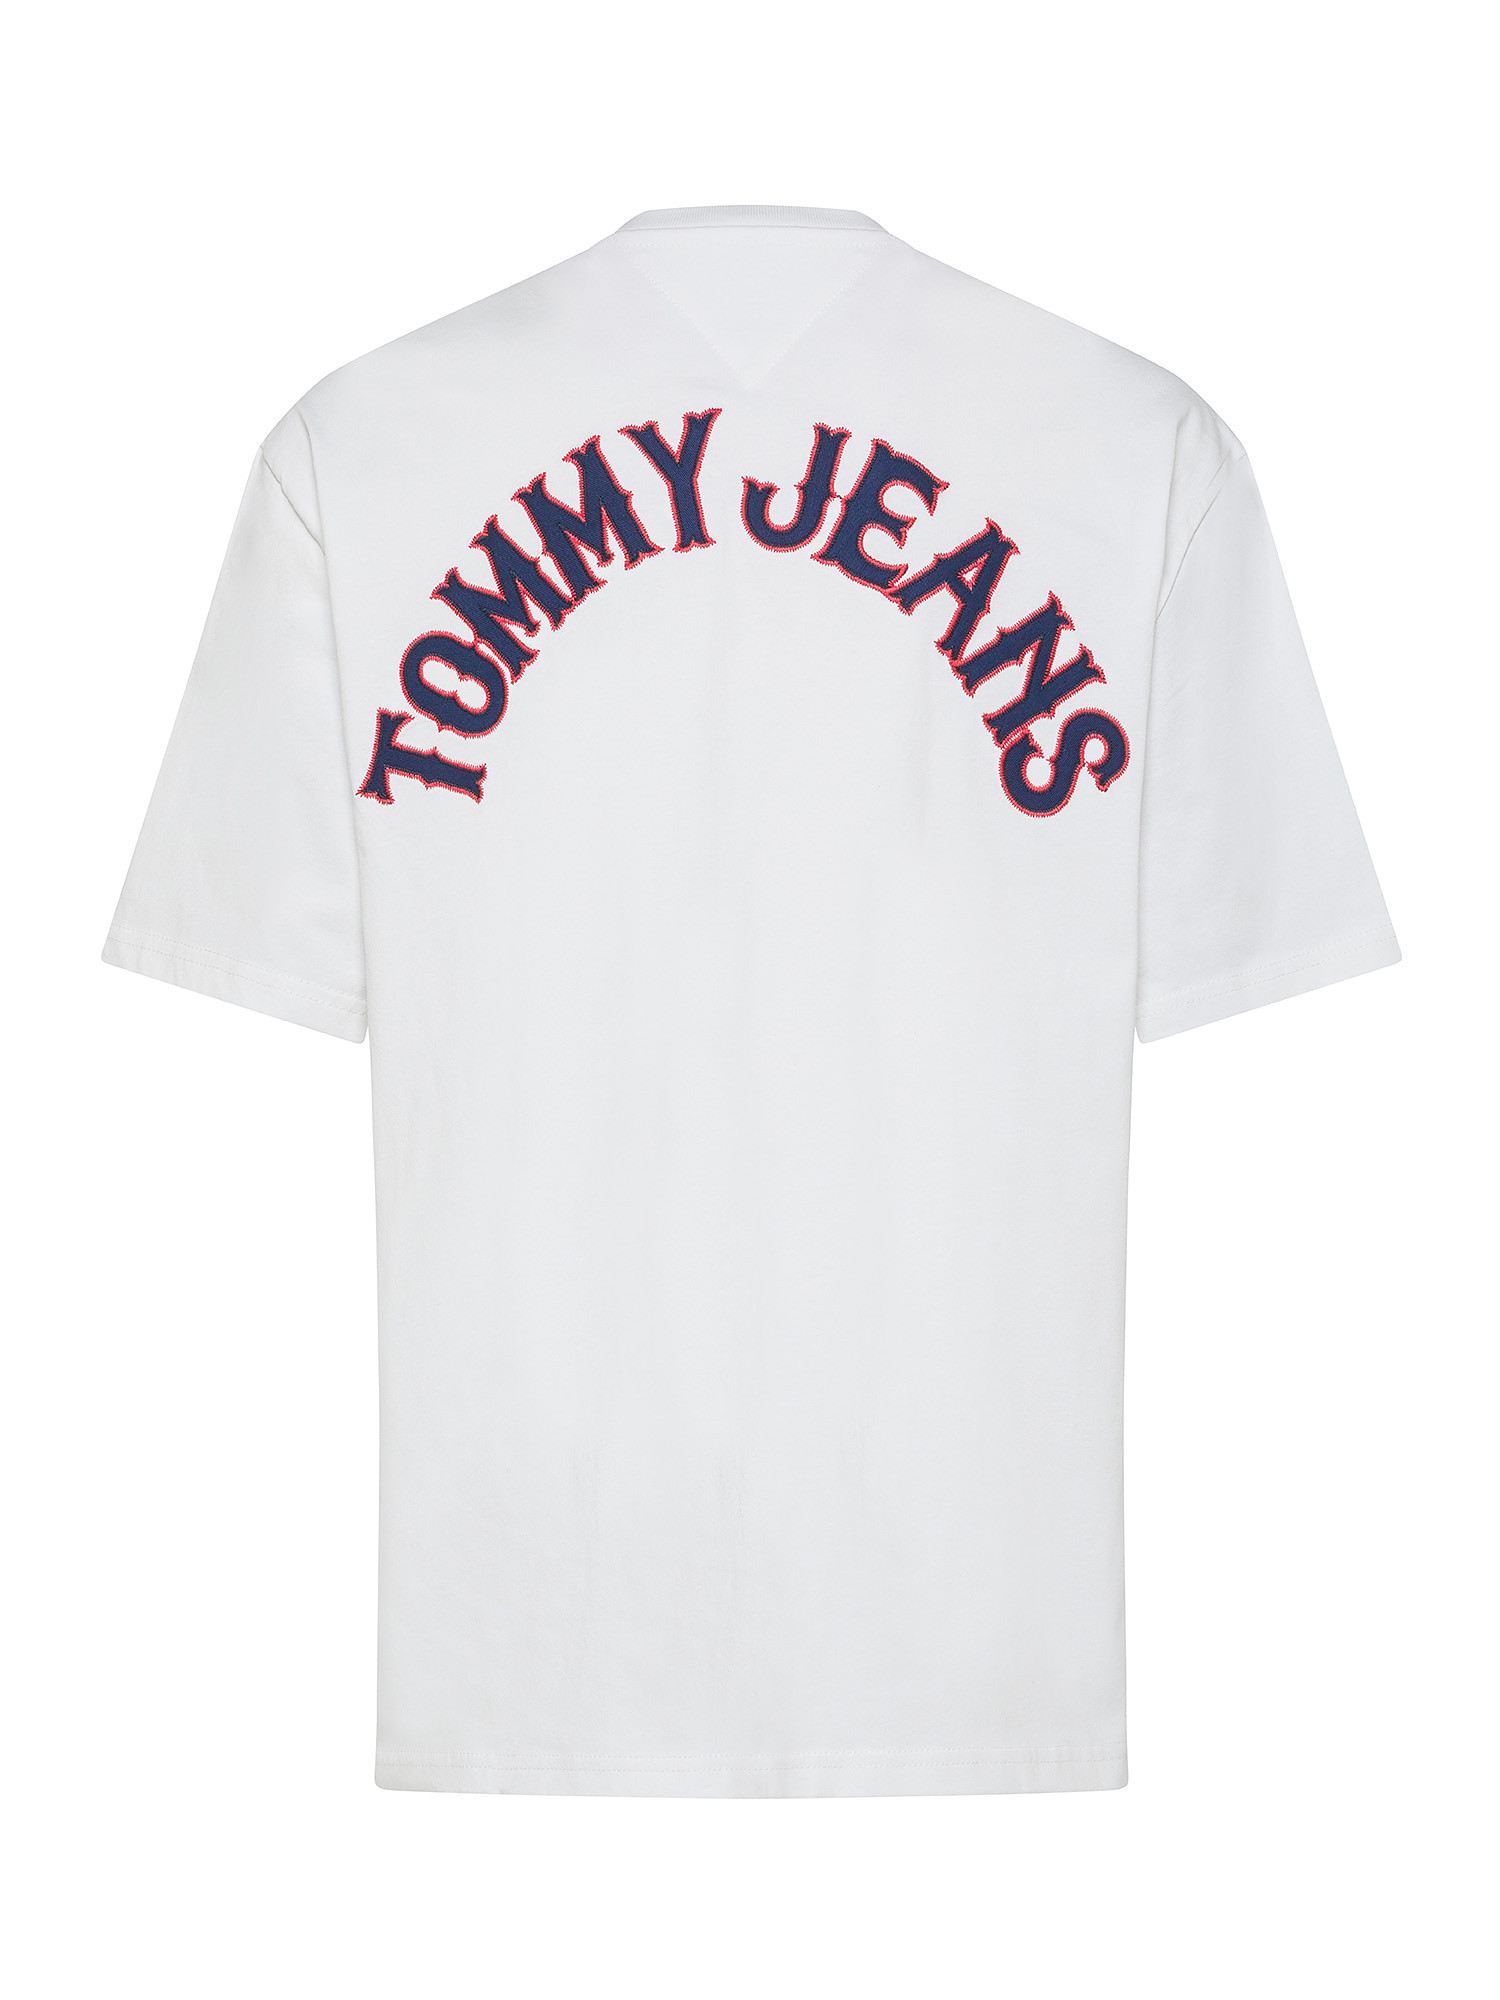 Tommy Jeans - T-shirt oversize in cotone, Bianco, large image number 1